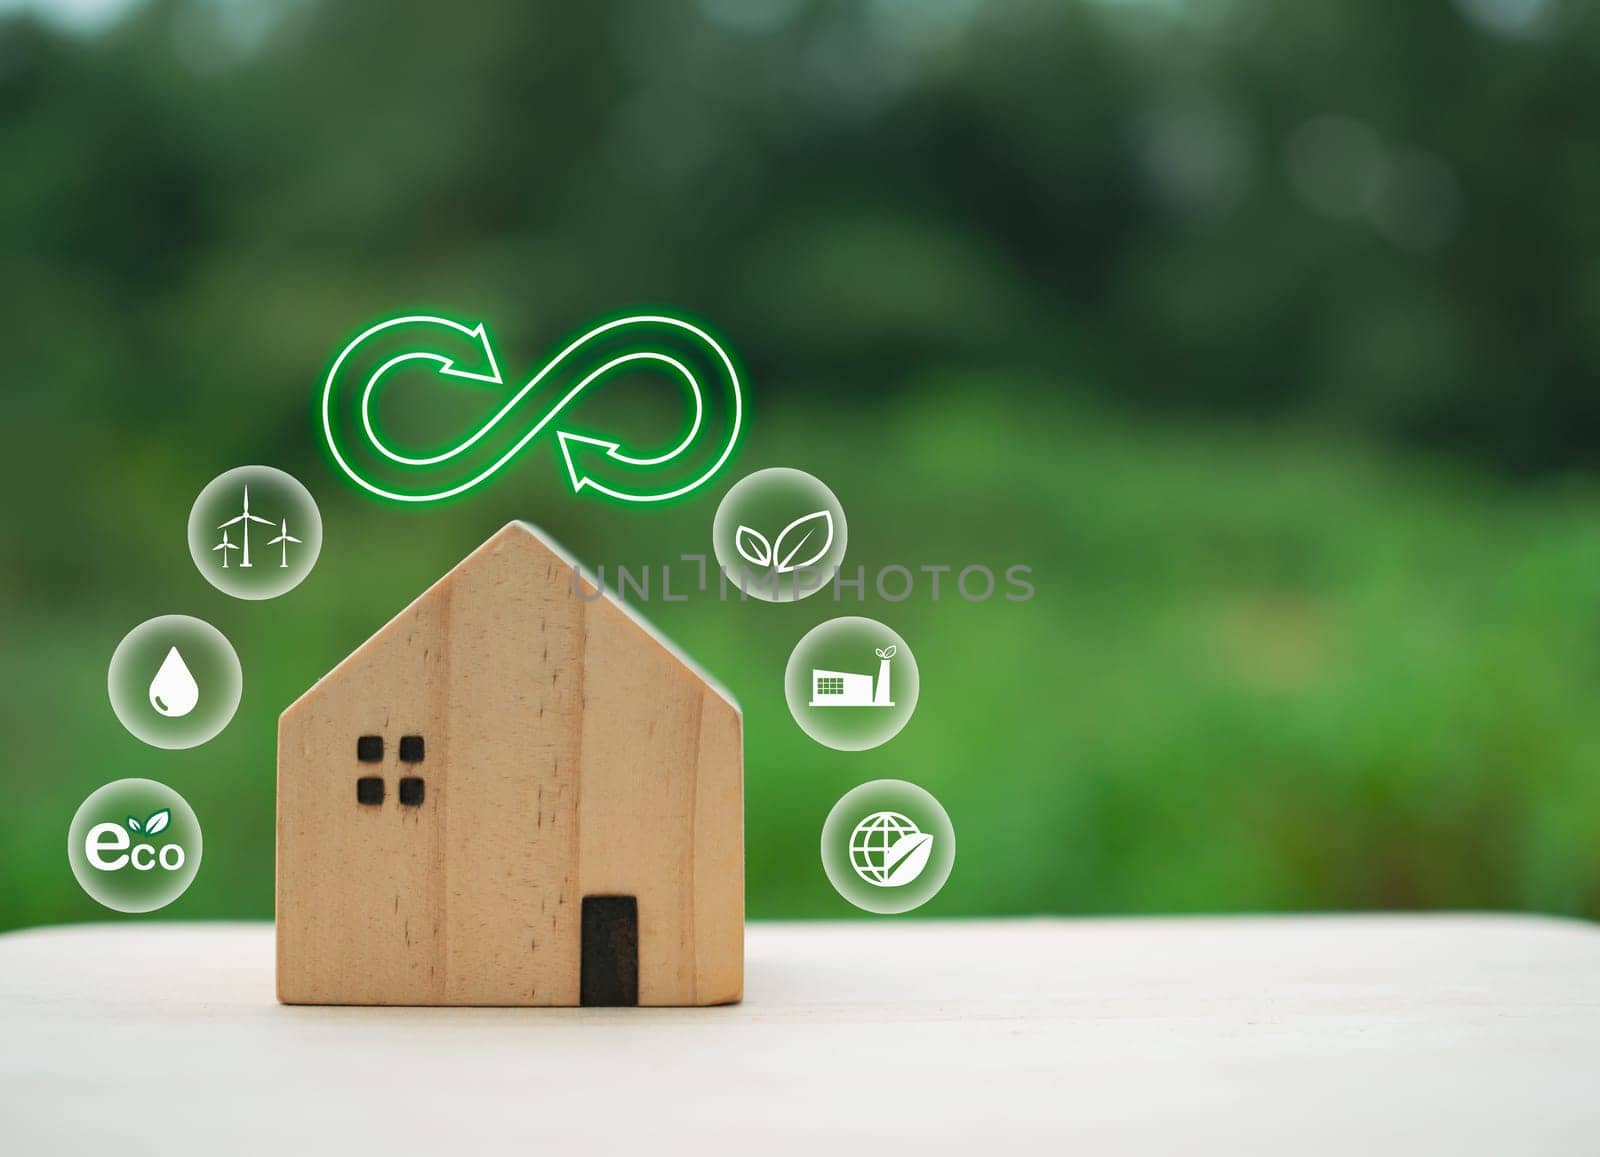 Model wooden house with green recycle symbol on nature background. Recycling concept. environmental protection concept by Unimages2527